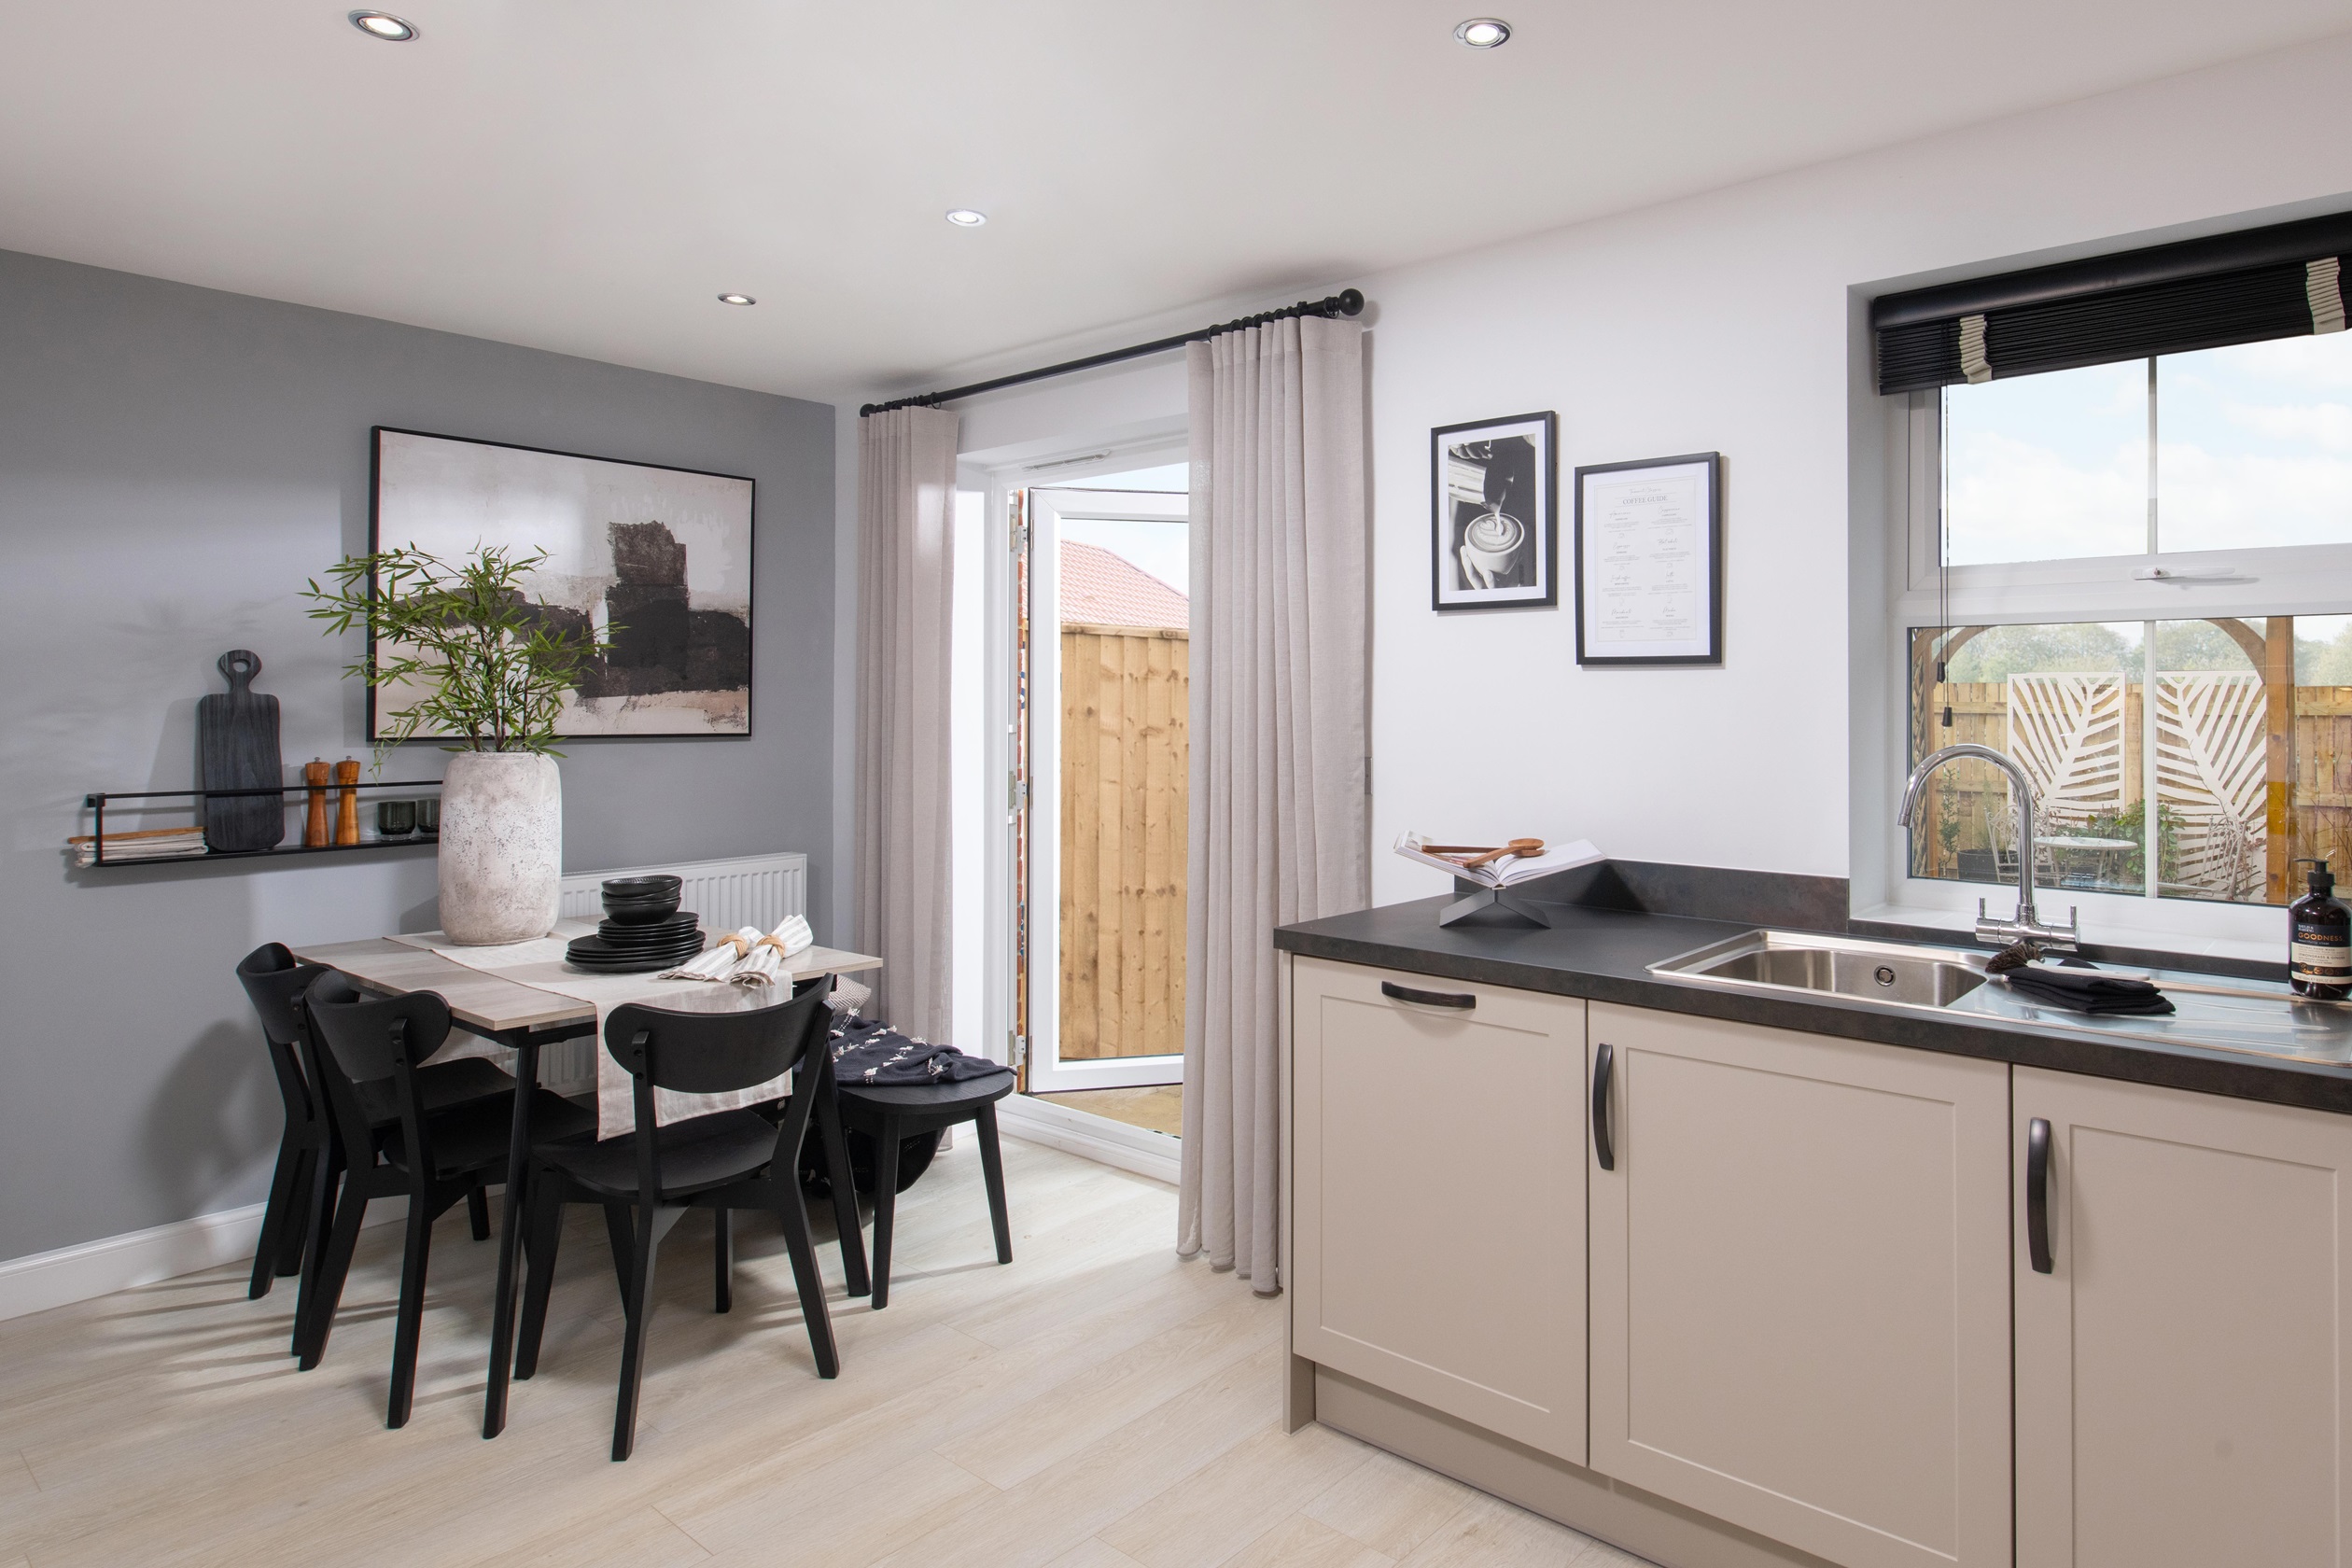 Property 3 of 10. The Archford Show Home